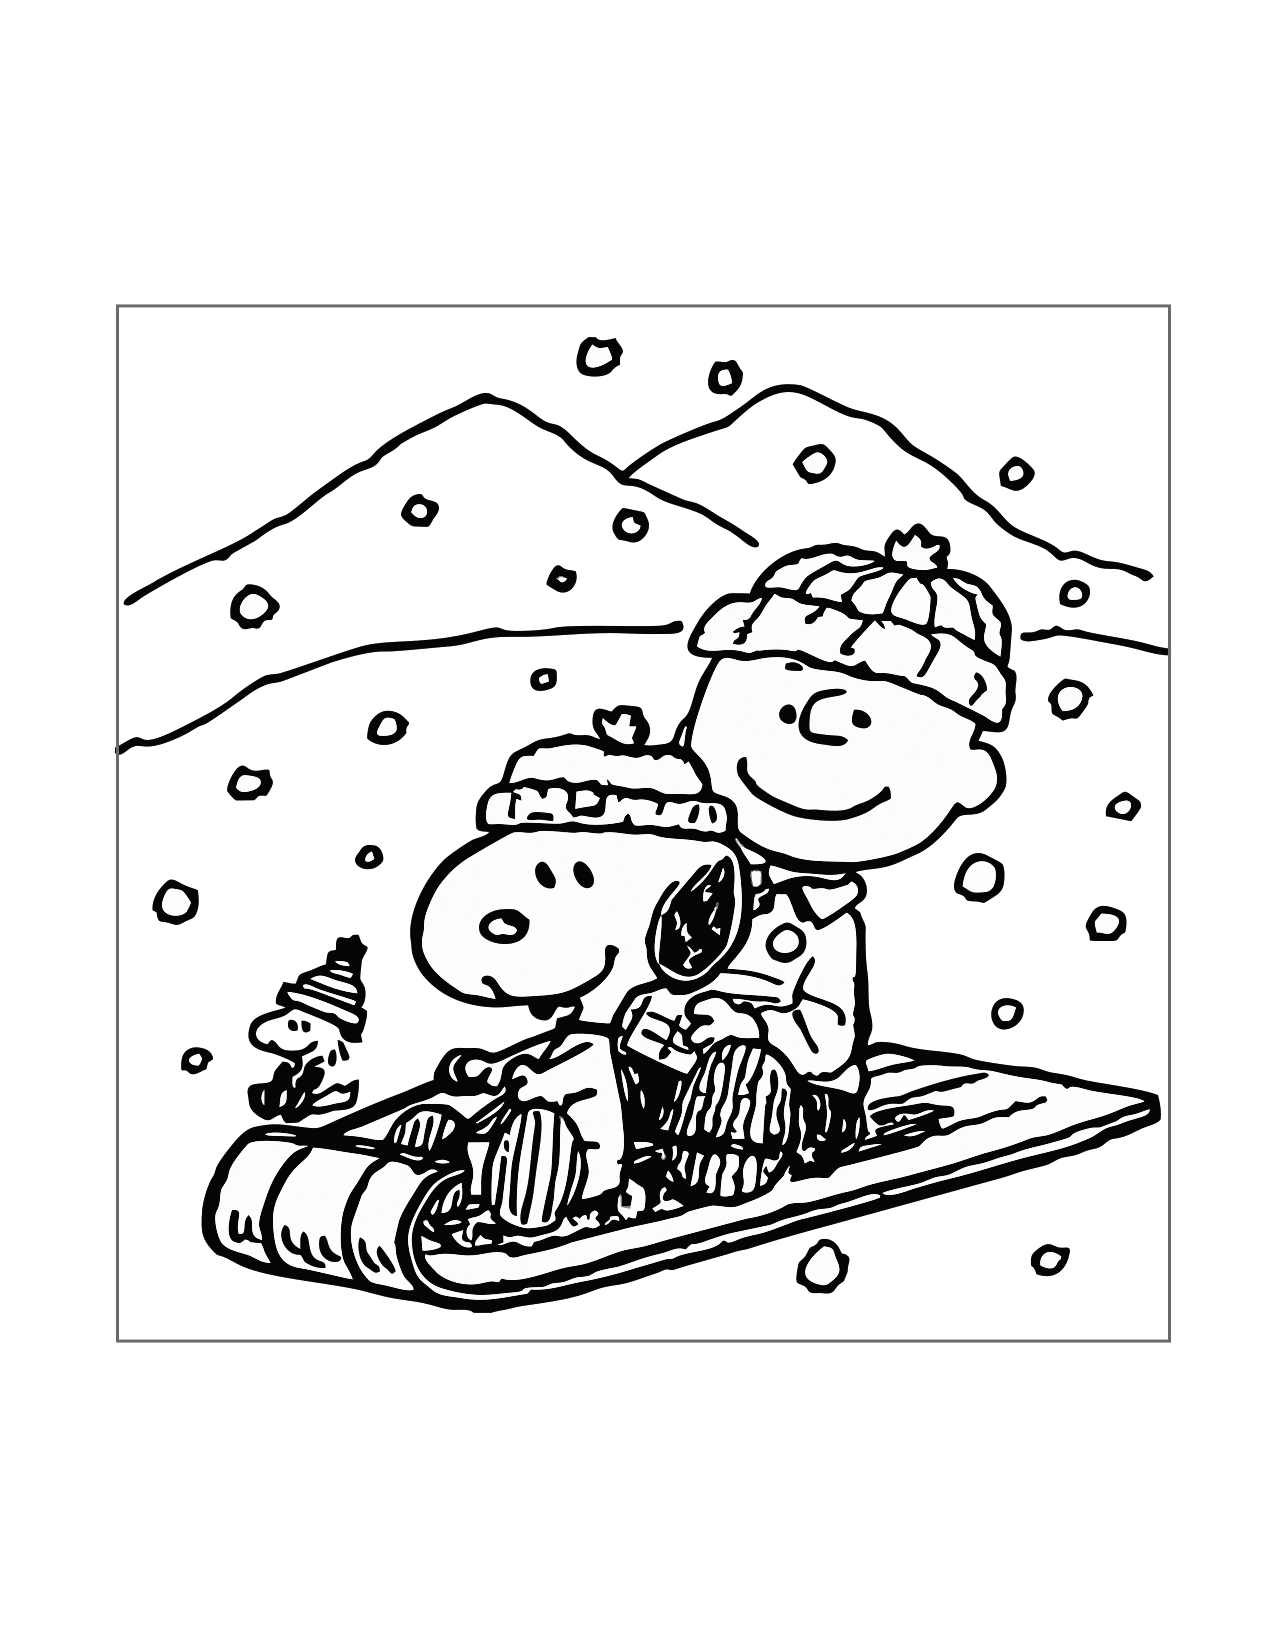 Charlie Brown And Snoopy Sledding Coloring Page